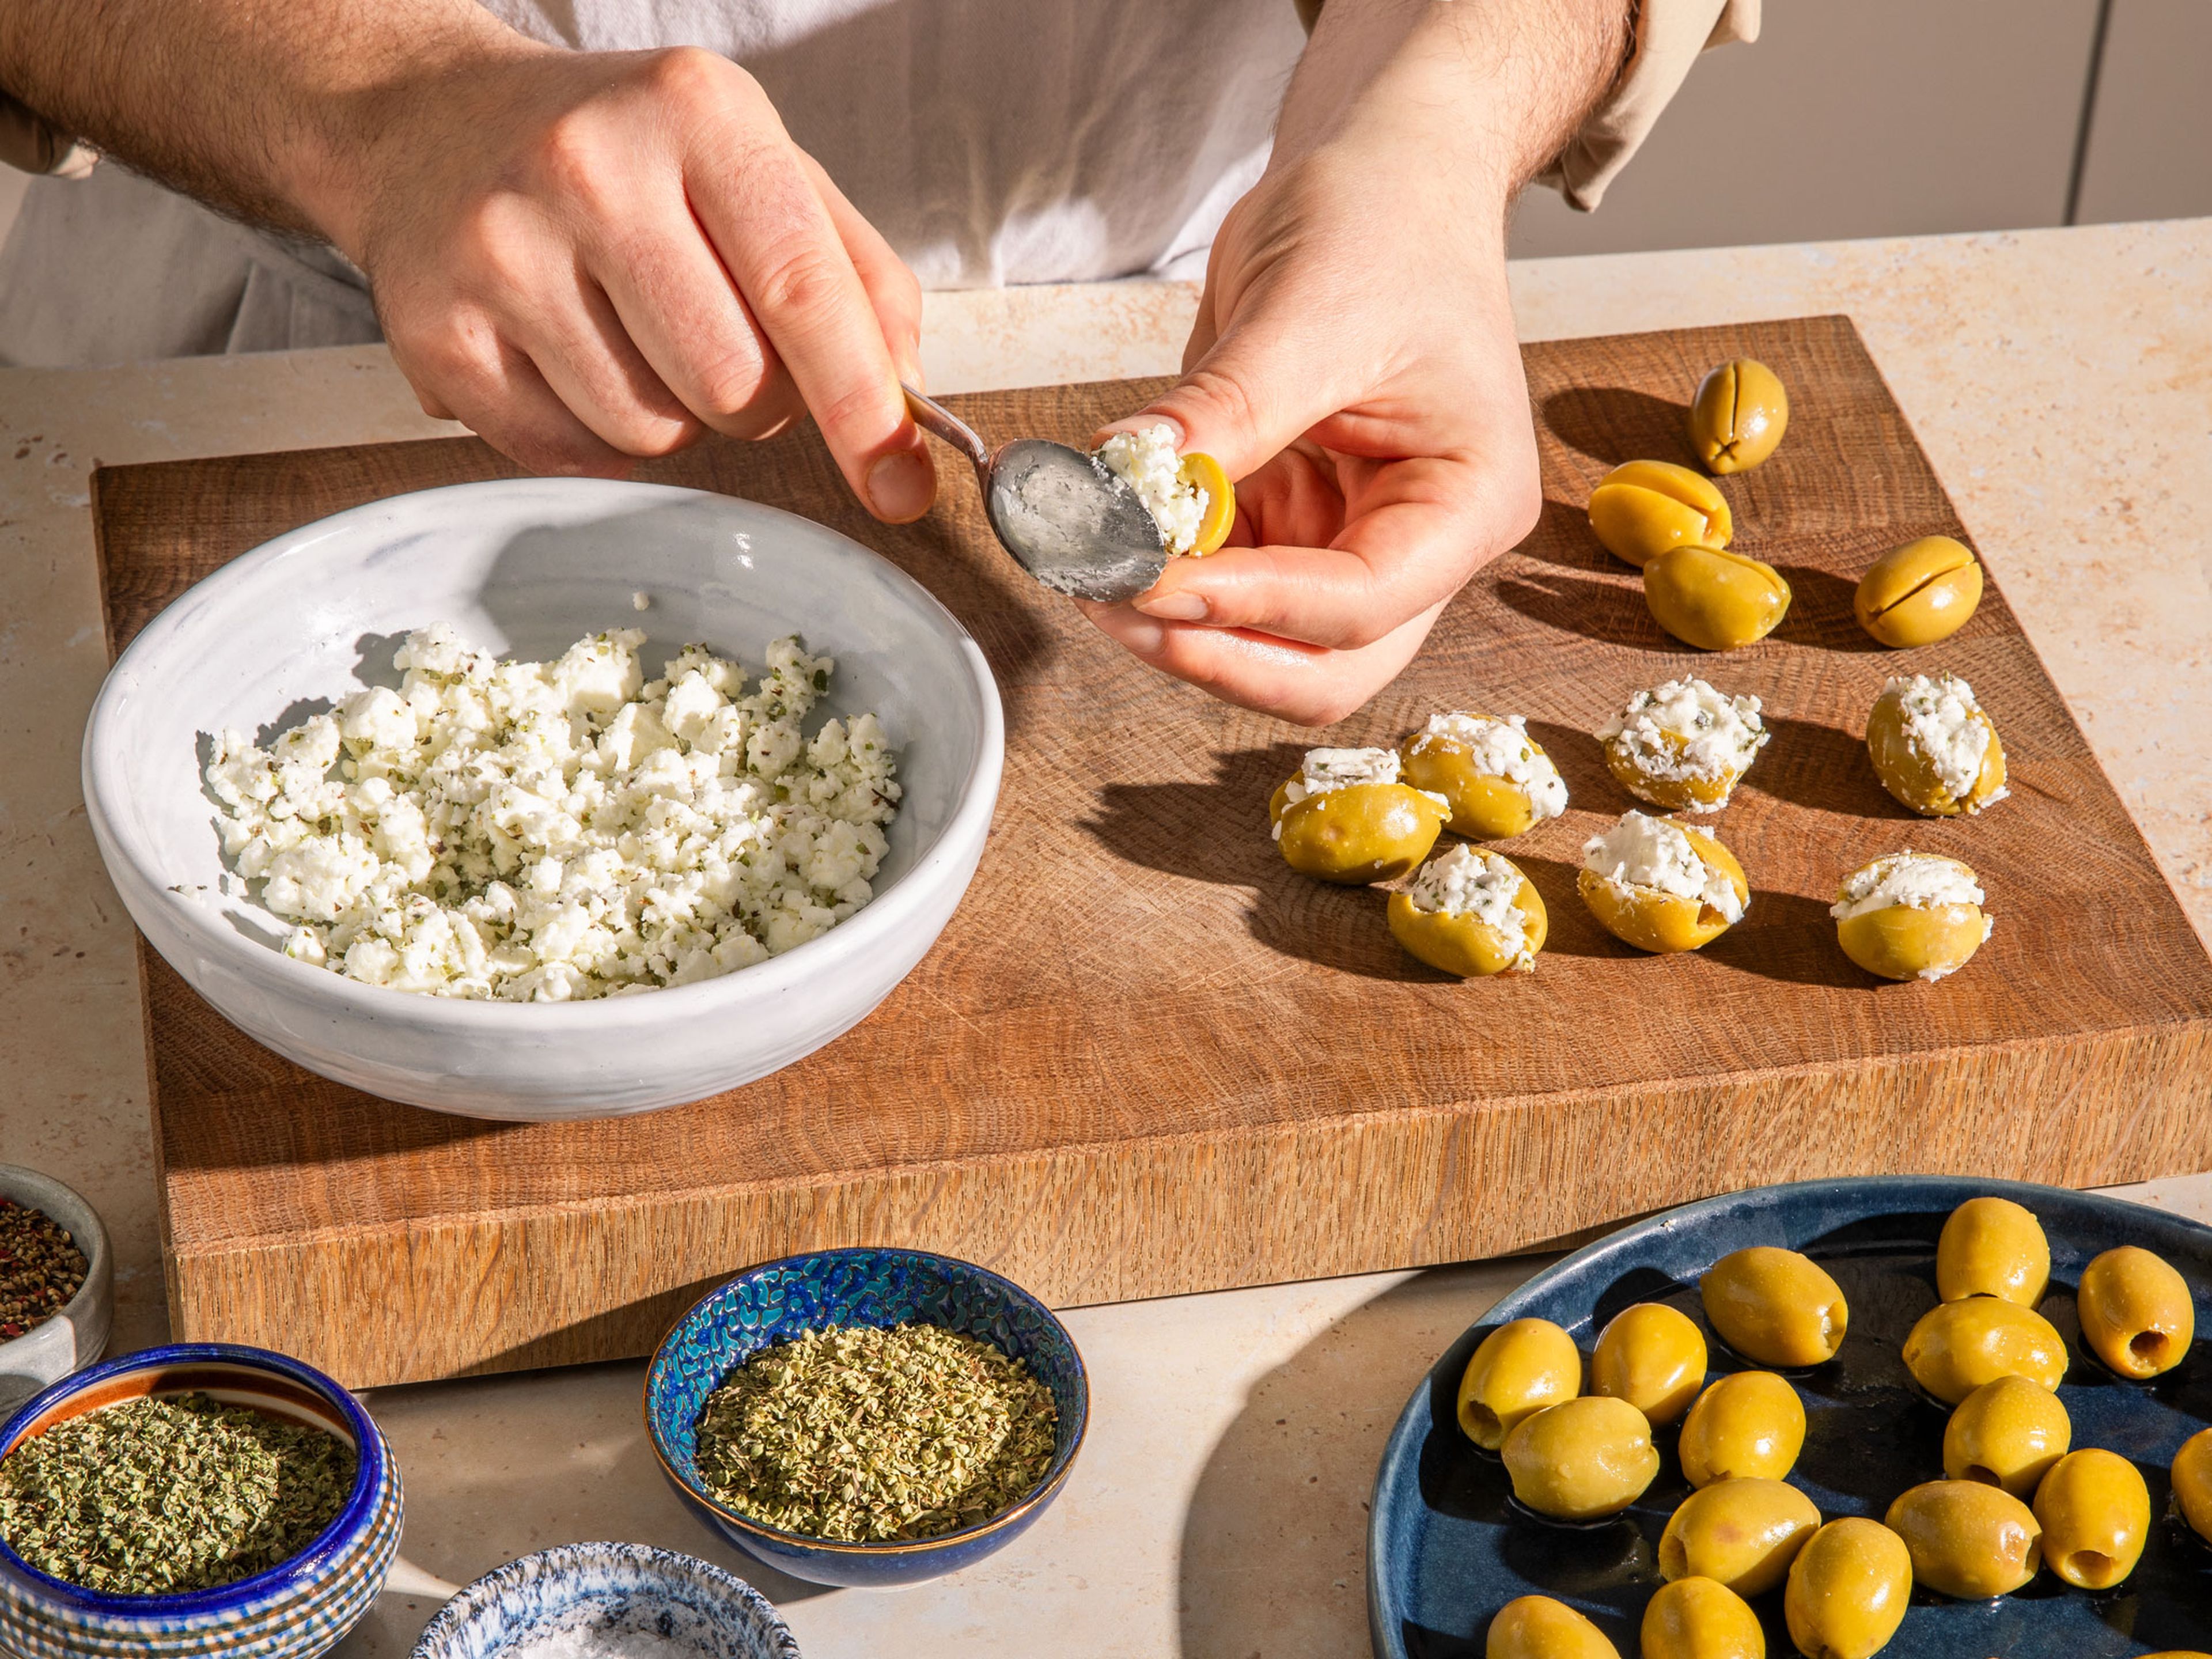 Fill ¾ of a medium-sized pot with frying oil. Place in a food thermometer and heat the oil to 356°F/180°C. If you don't have a thermometer, lower an olive carefully into the oil. The oil is ready if it sizzles slightly. While the oil is heating up, mash up feta with salt, pepper and dried mint and oregano. Slice olives open and stuff each olive generously with the feta mixture.